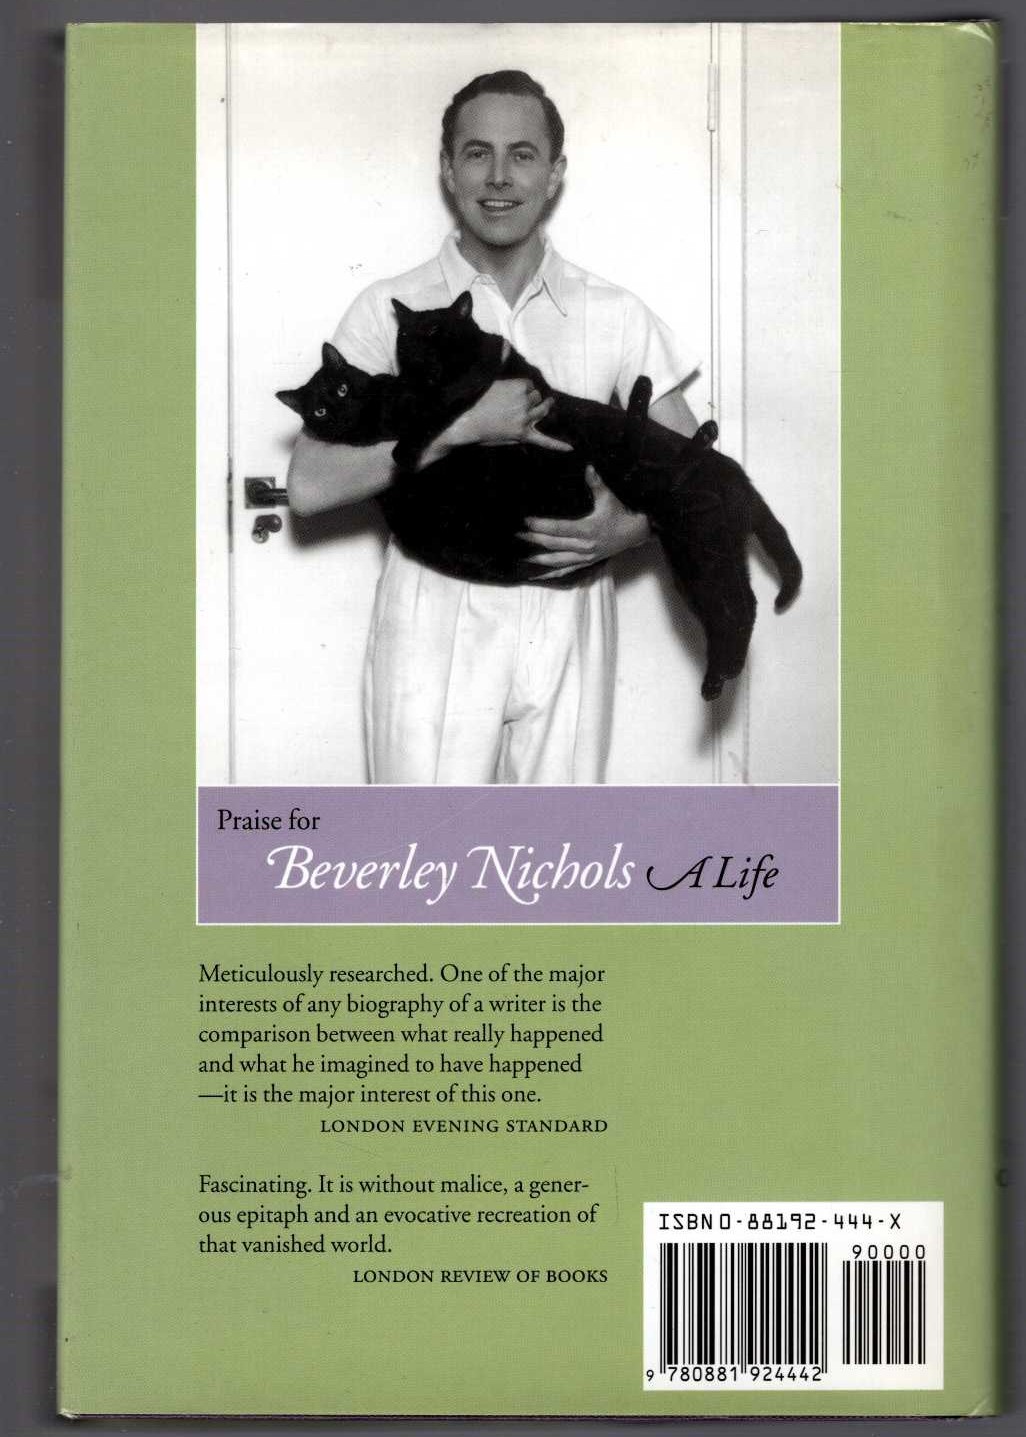 BEVERLEY NICHOLS. A Life magnified rear book cover image